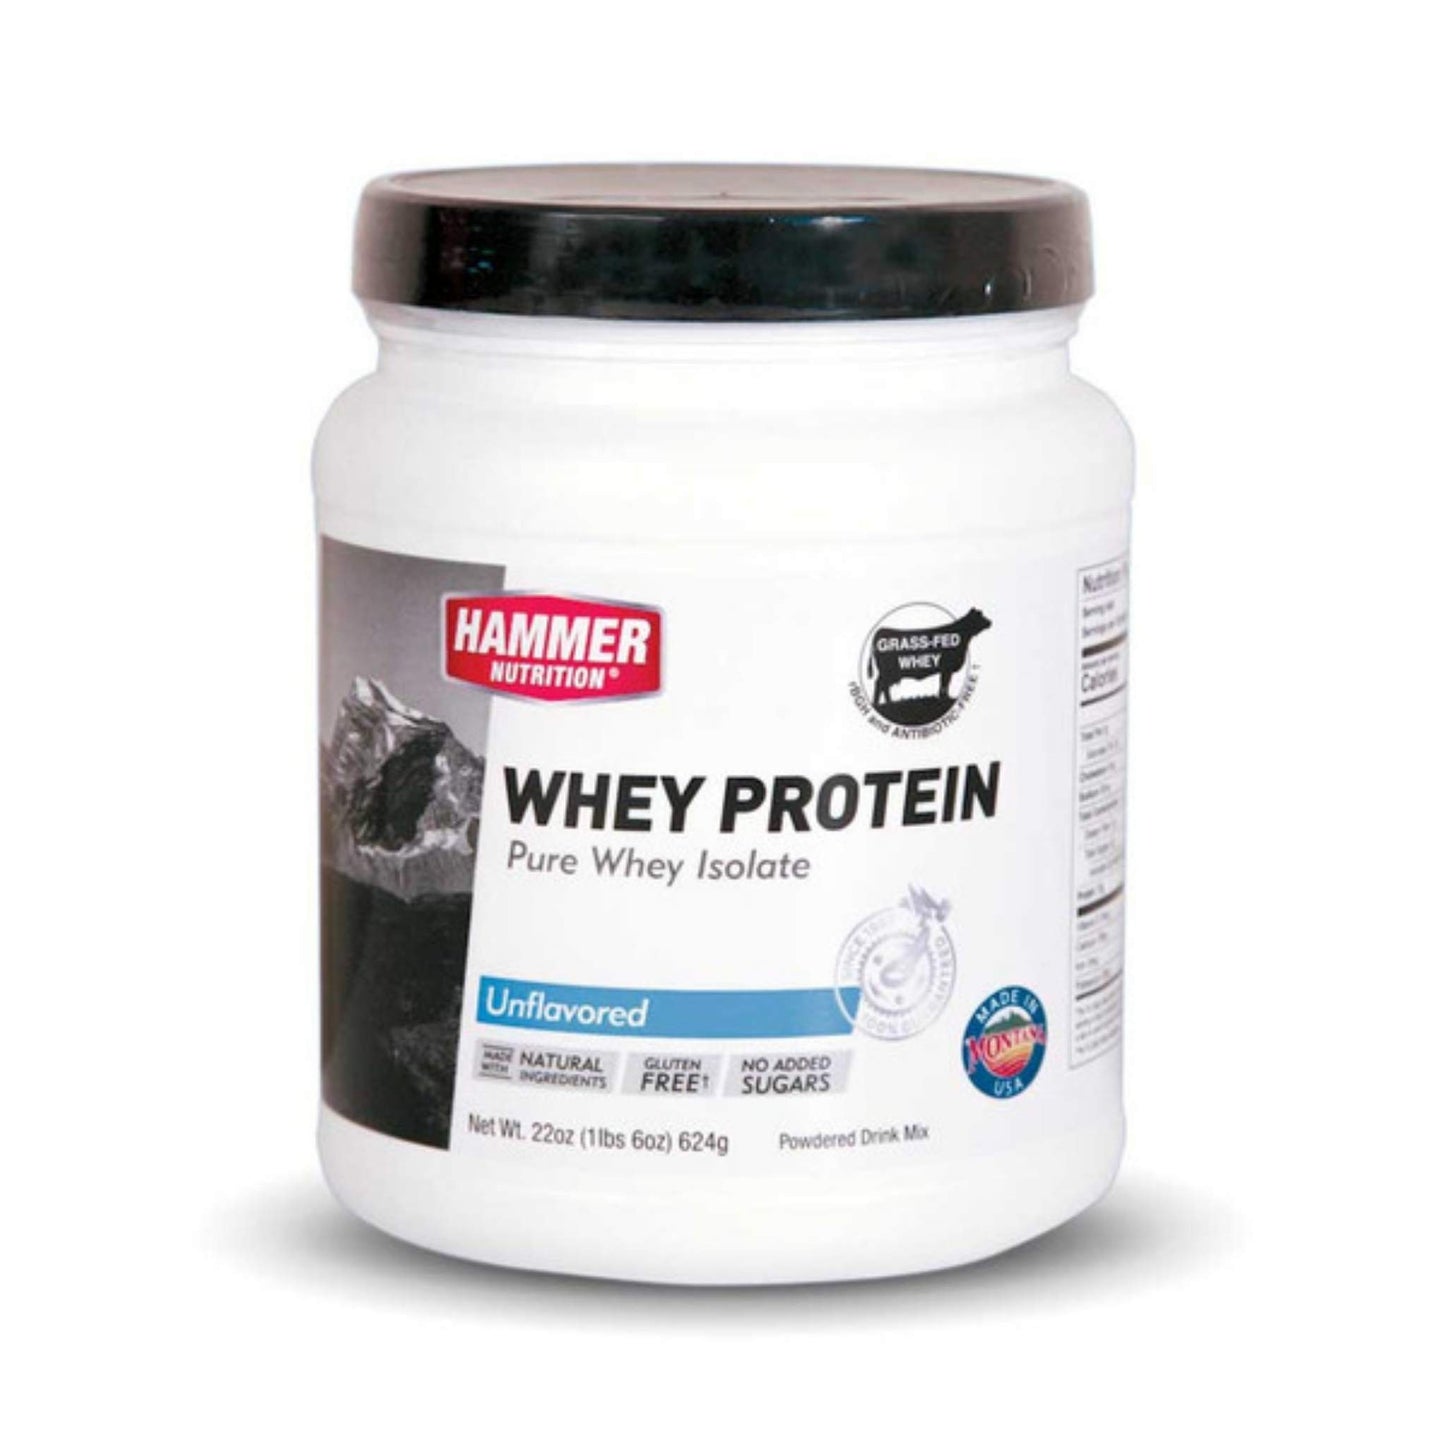 Hammer Nutrition - Whey Protein, Unflavored, 24 Servings, Team Perfect